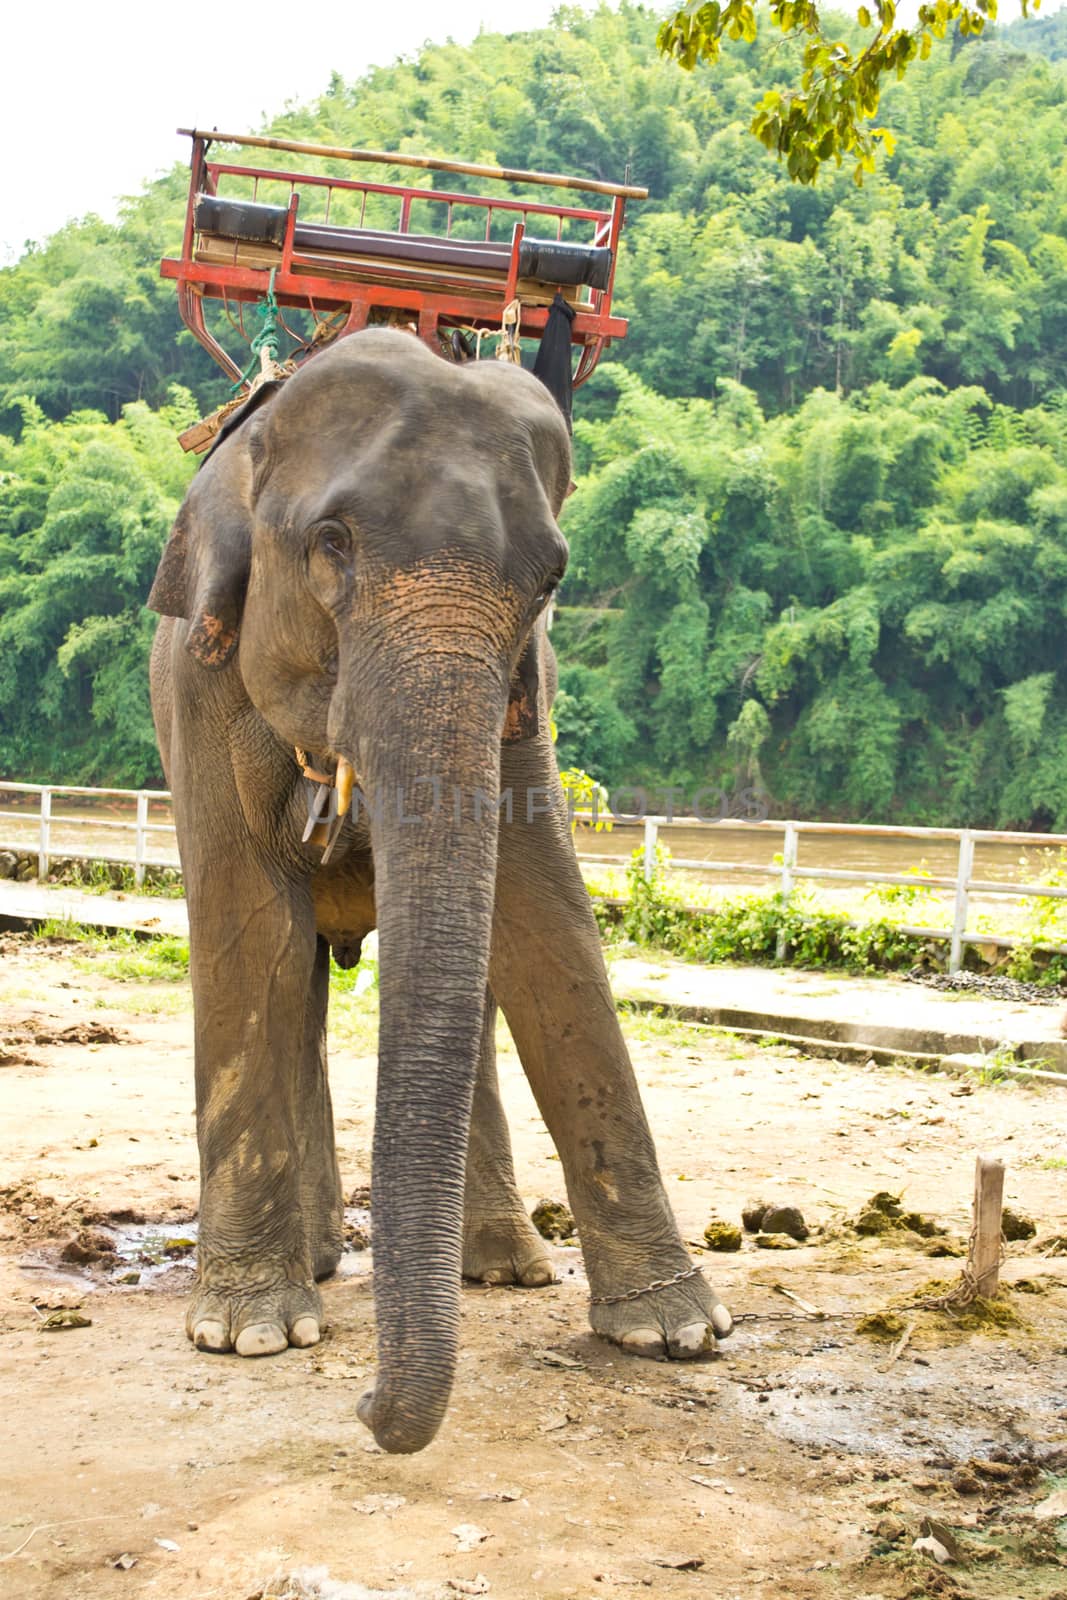 Chang and attractions in elephant camps